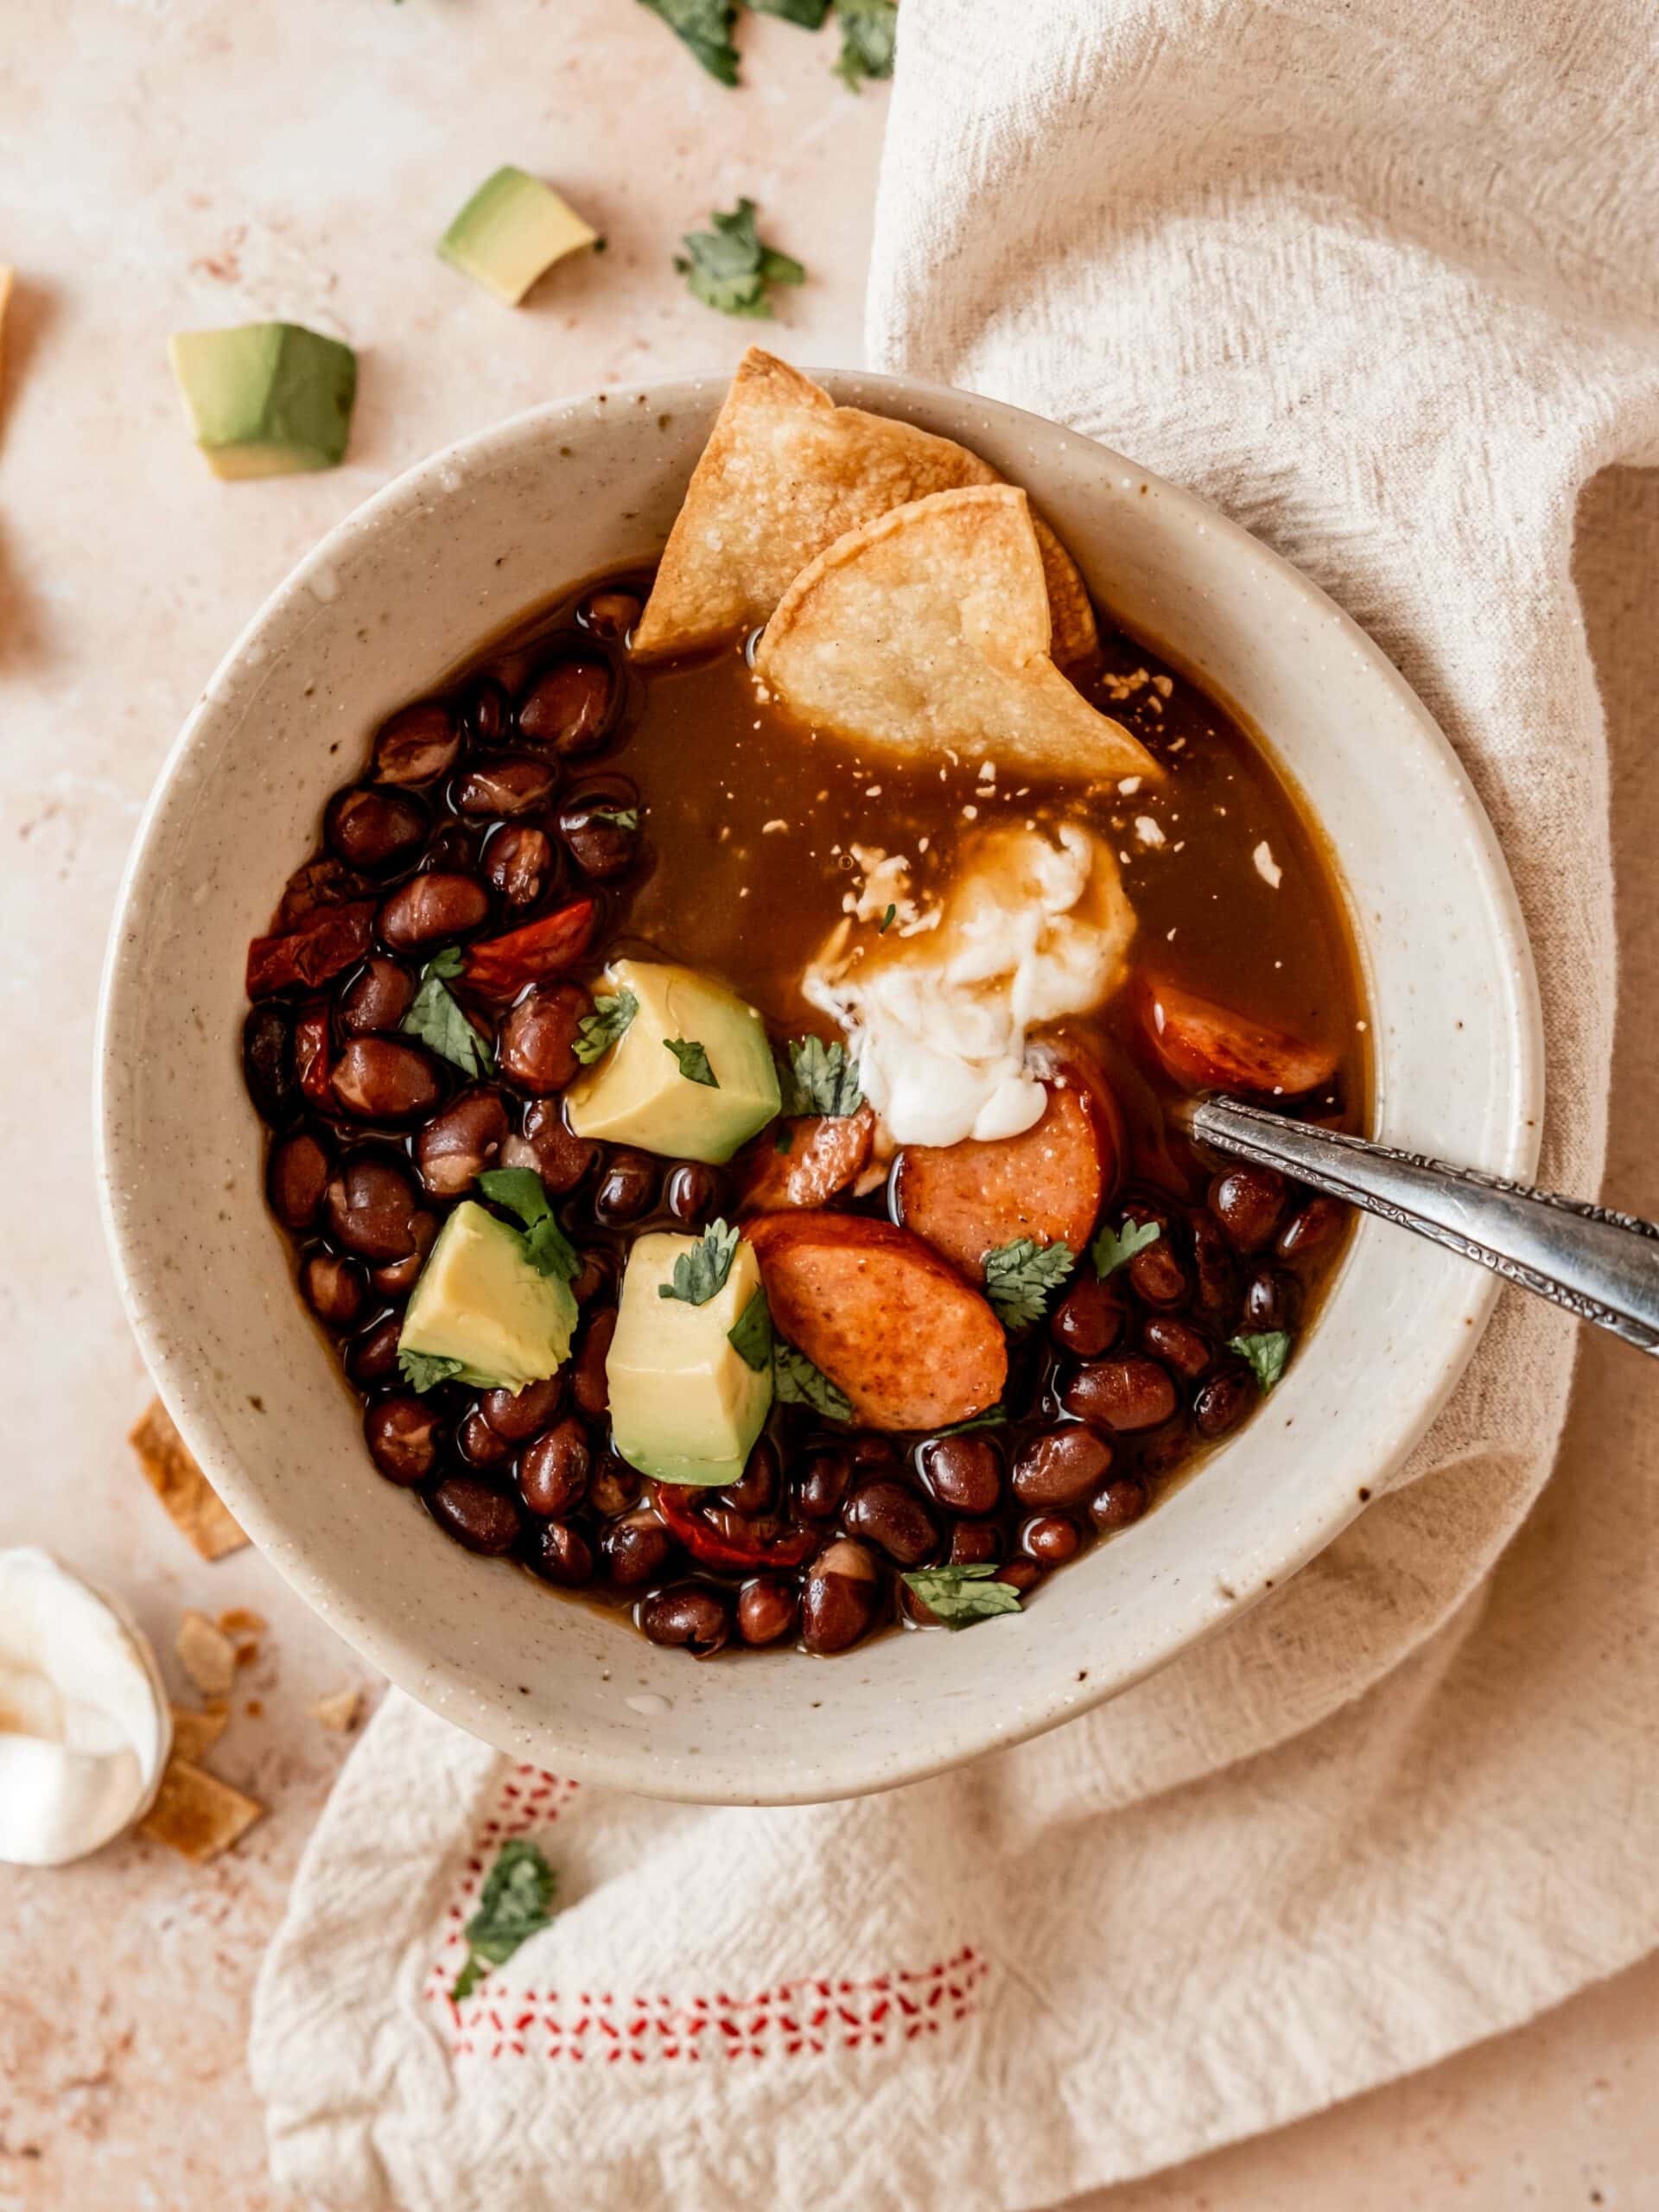 Spicy black bean soup with sausages, avocado and tortilla chips.